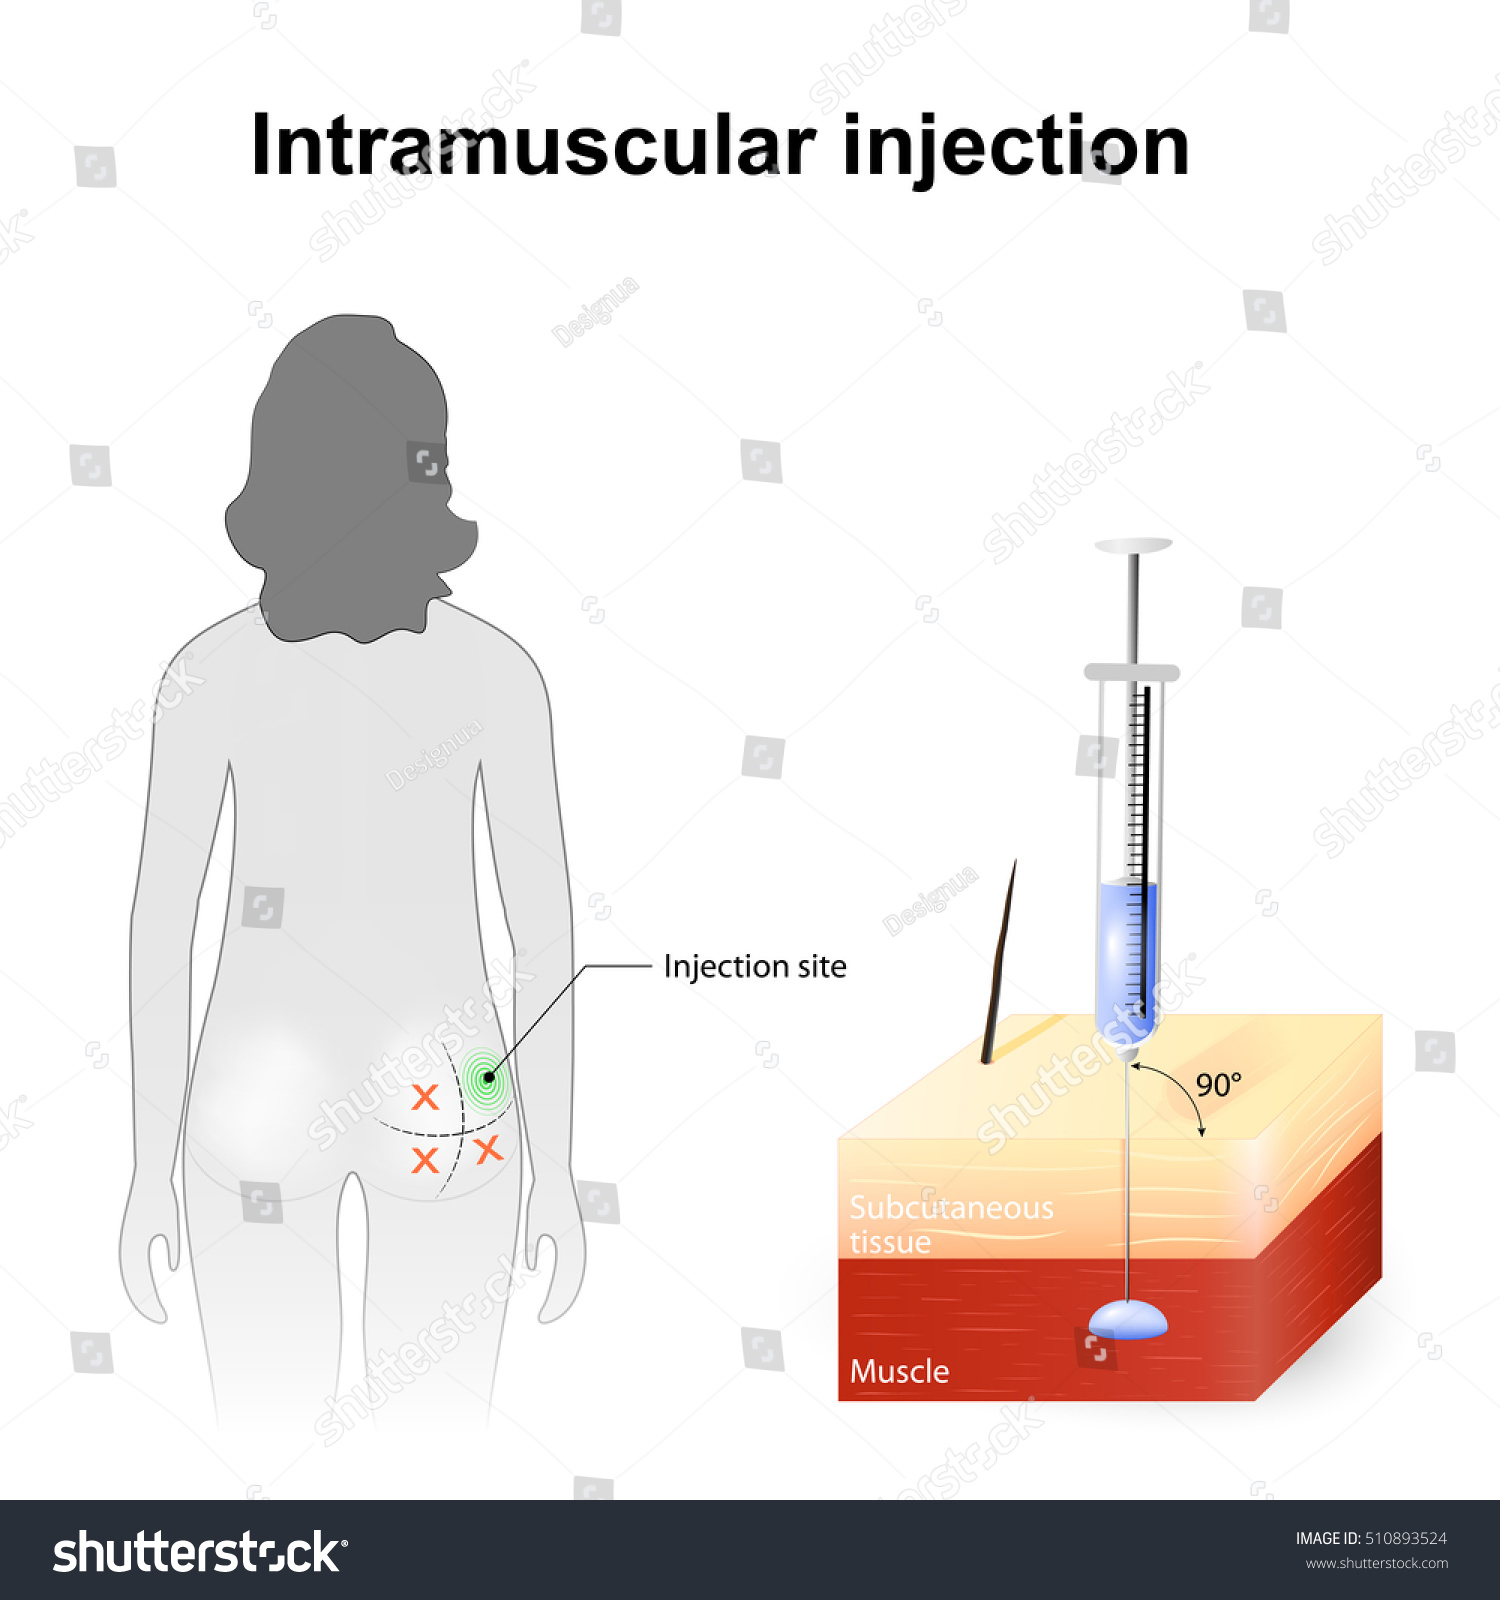 Intramuscular injection. Angle and depth of injections. Technique, rules and injection site of intramuscular route of administration.  #510893524